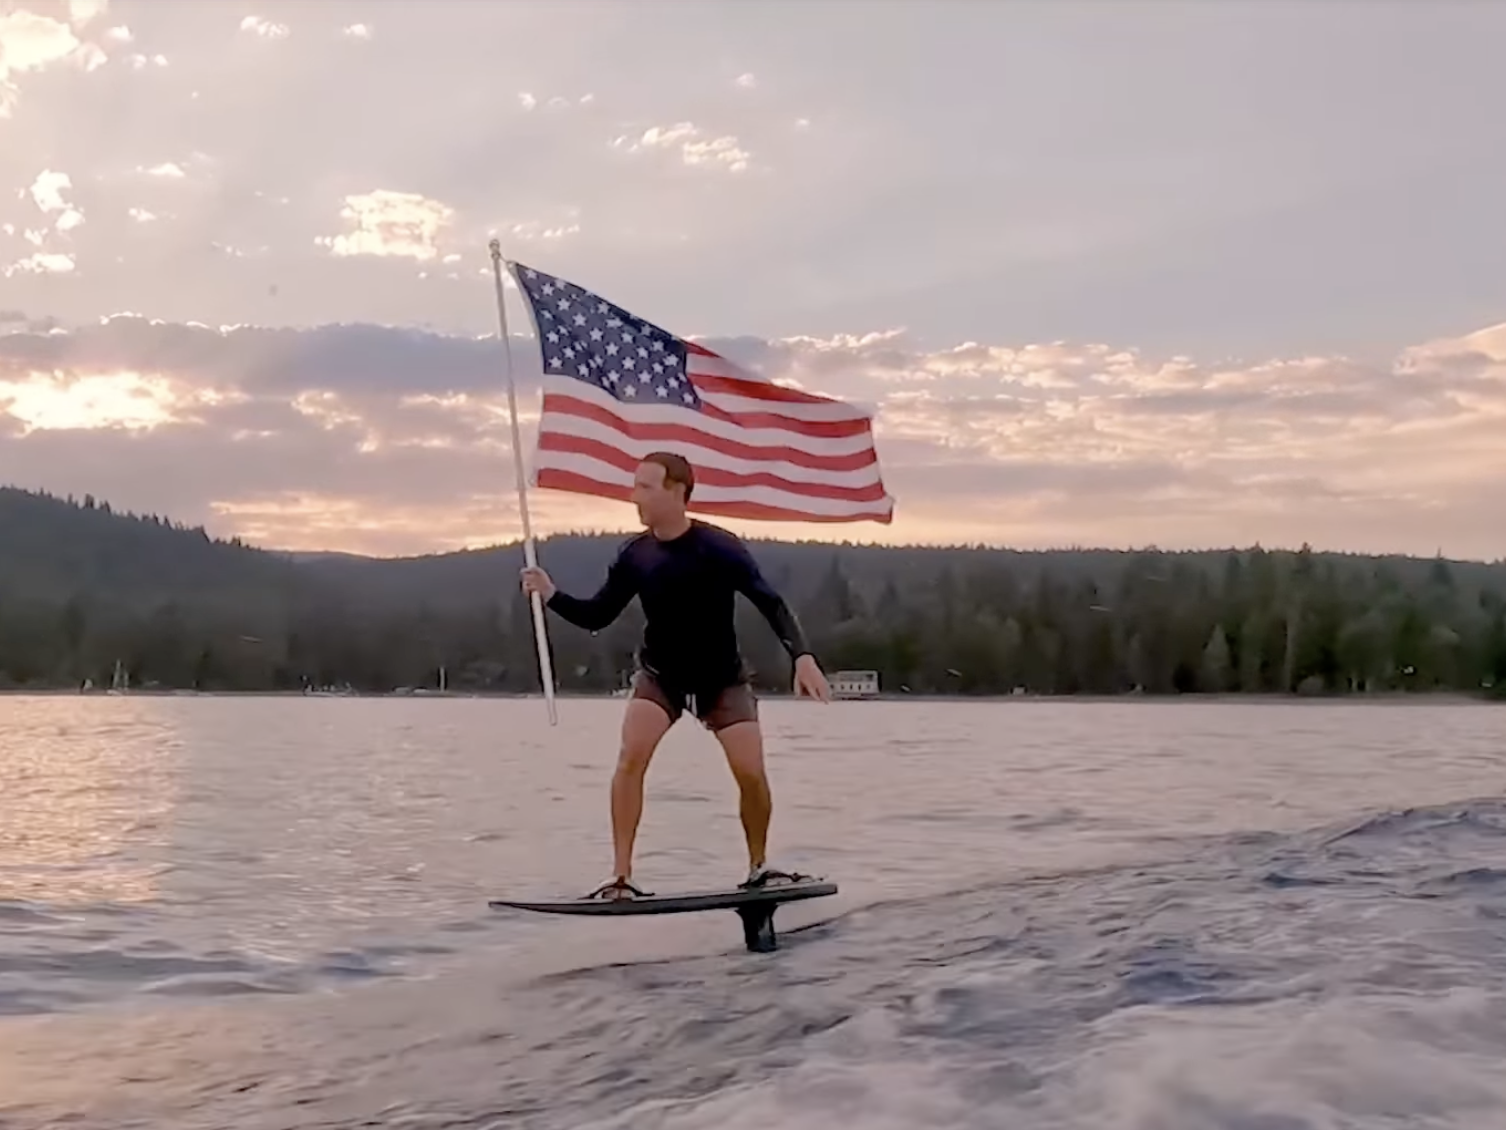 Mark Zuckerberg rides his electric surfboard on the Fourth of July